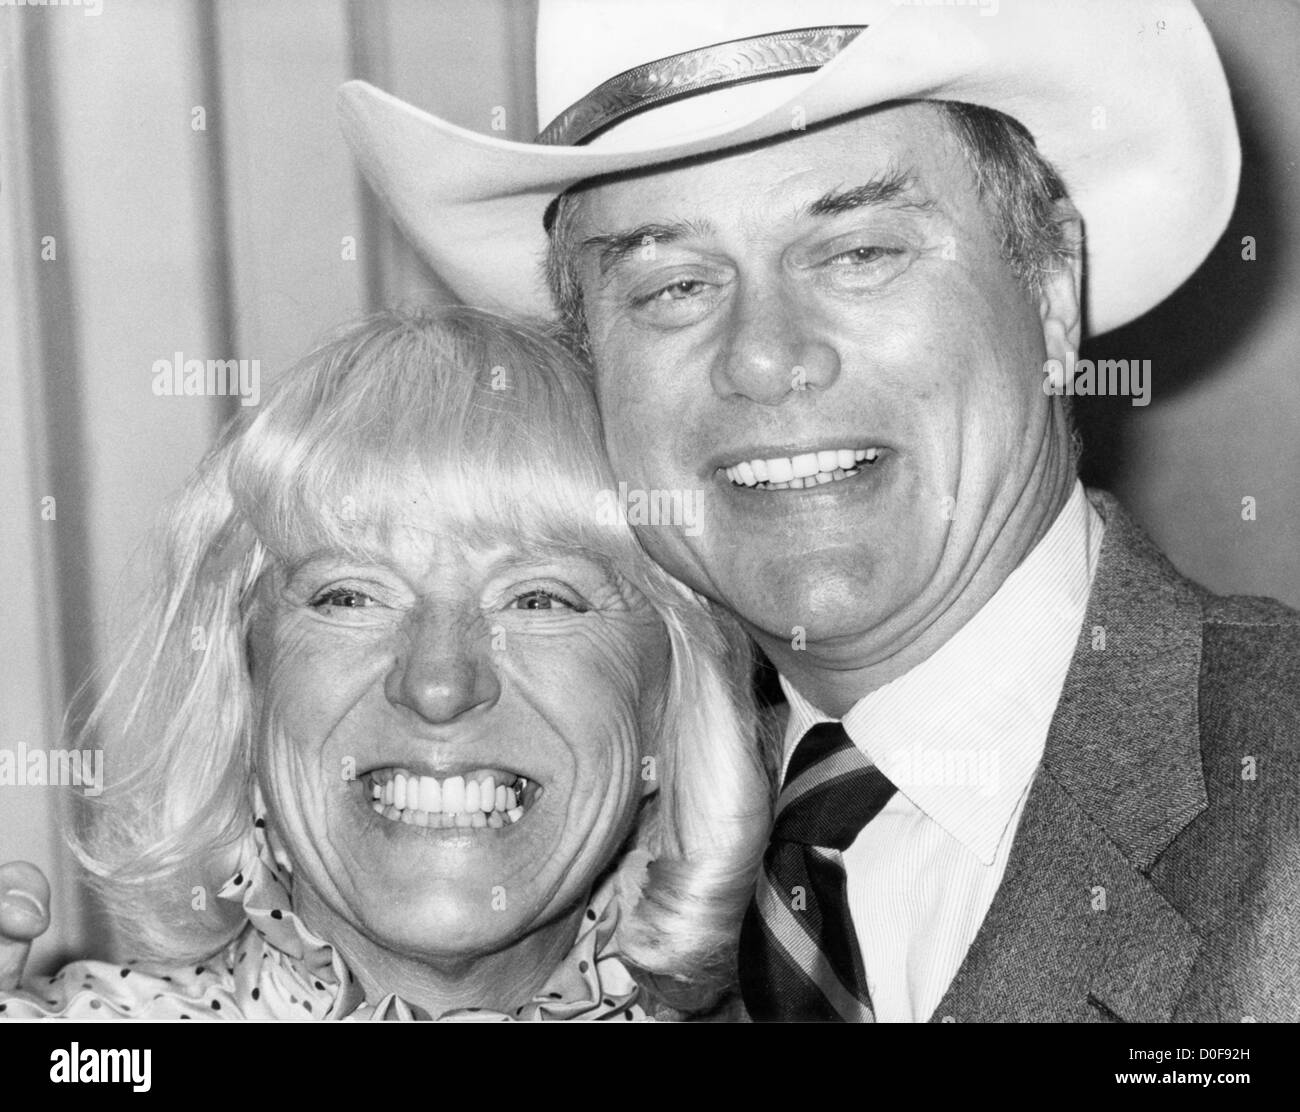 Nov. 23, 2012 - Actor, writer producer Larry Hagman, who created one of American television's most supreme villains in the conniving, amoral oilman J.R. Ewing of 'Dallas,' has died, He was 81. Hagman died at a Dallas hospital of complications from his battle with throat cancer, quoting a statement from his family. He had suffered from liver cancer and cirrhosis of the liver in the 1990s after decades of drinking. PICTURED: Mar. 21, 1980 - London, England, U.K. - American television actor, producer and director, LARRY HAGMAN with his MAJ AXELSSON. (Credit Image: © KEYSTONE Pictures USA/ZUMAPRES Stock Photo